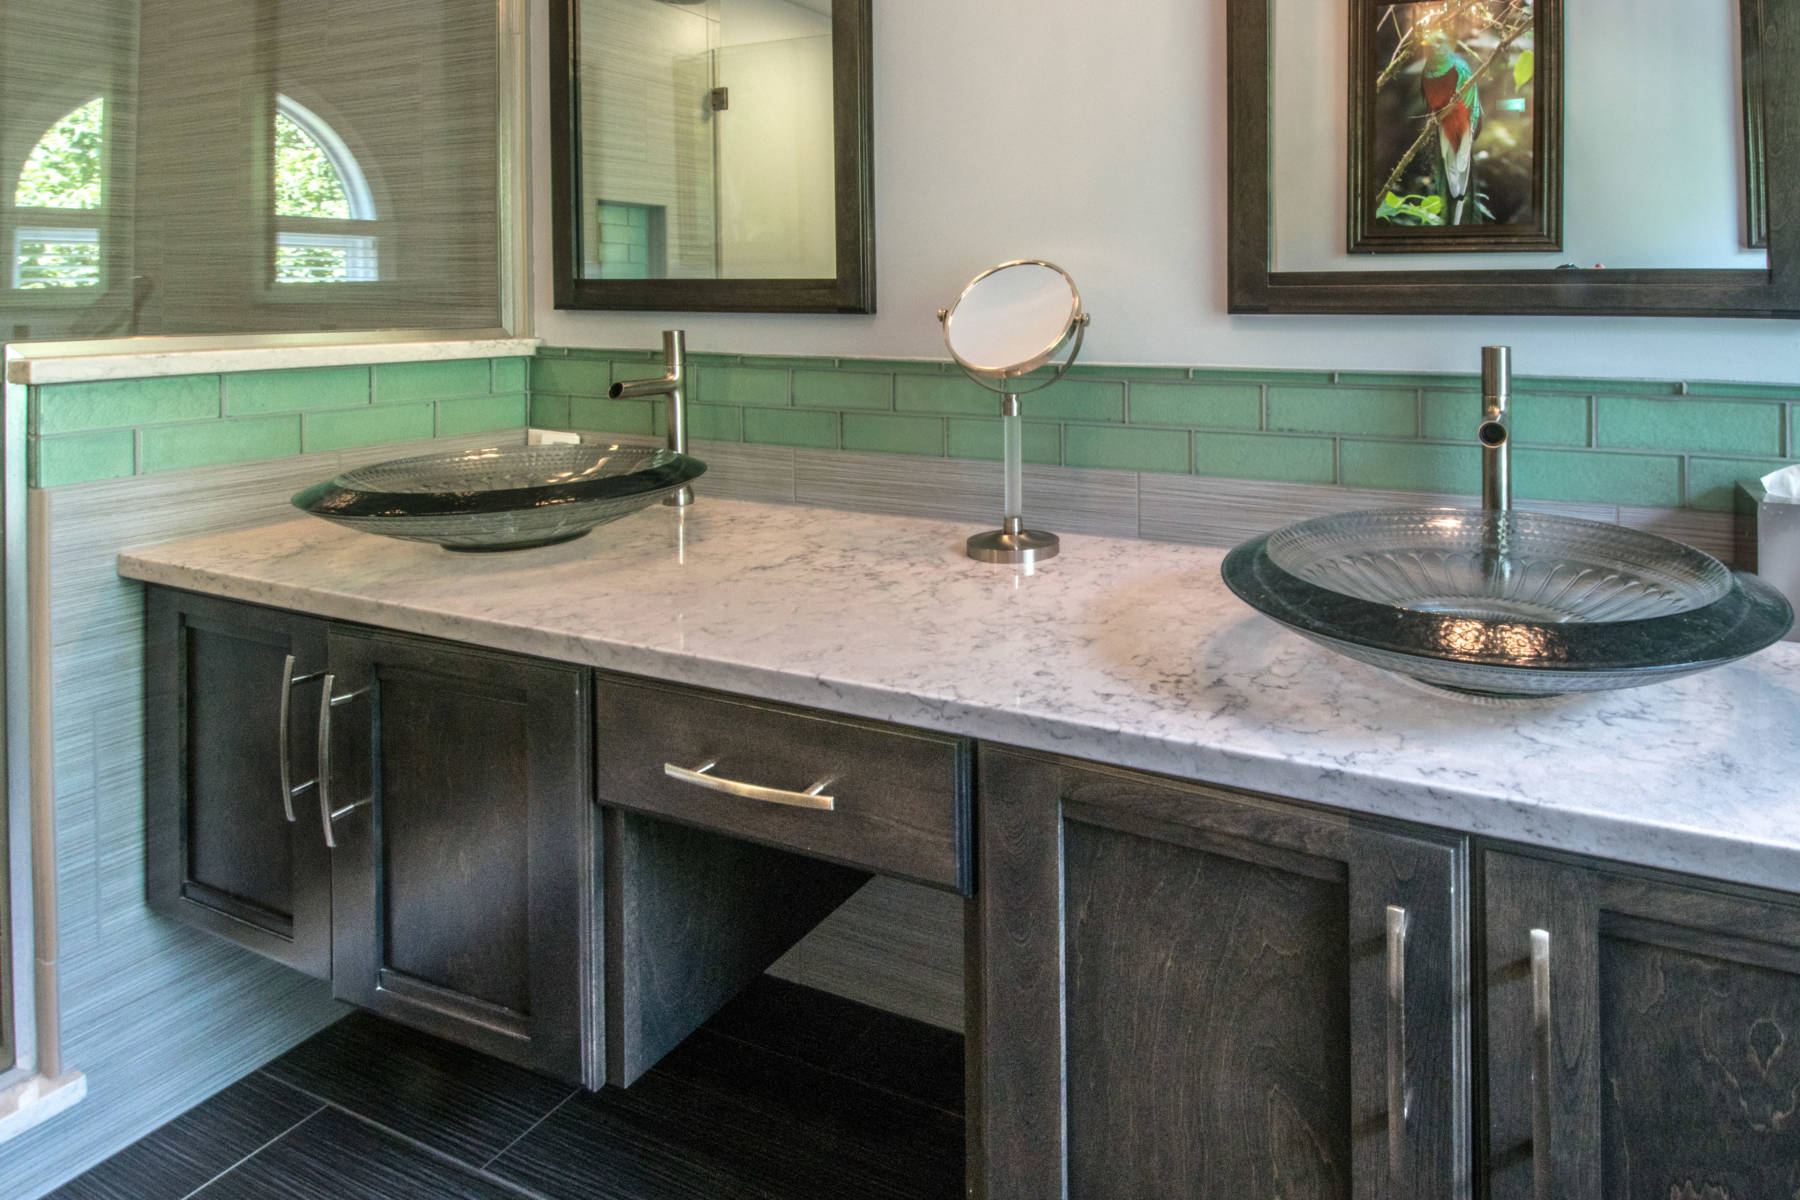 Sophisticated his and hers vanities with green tile